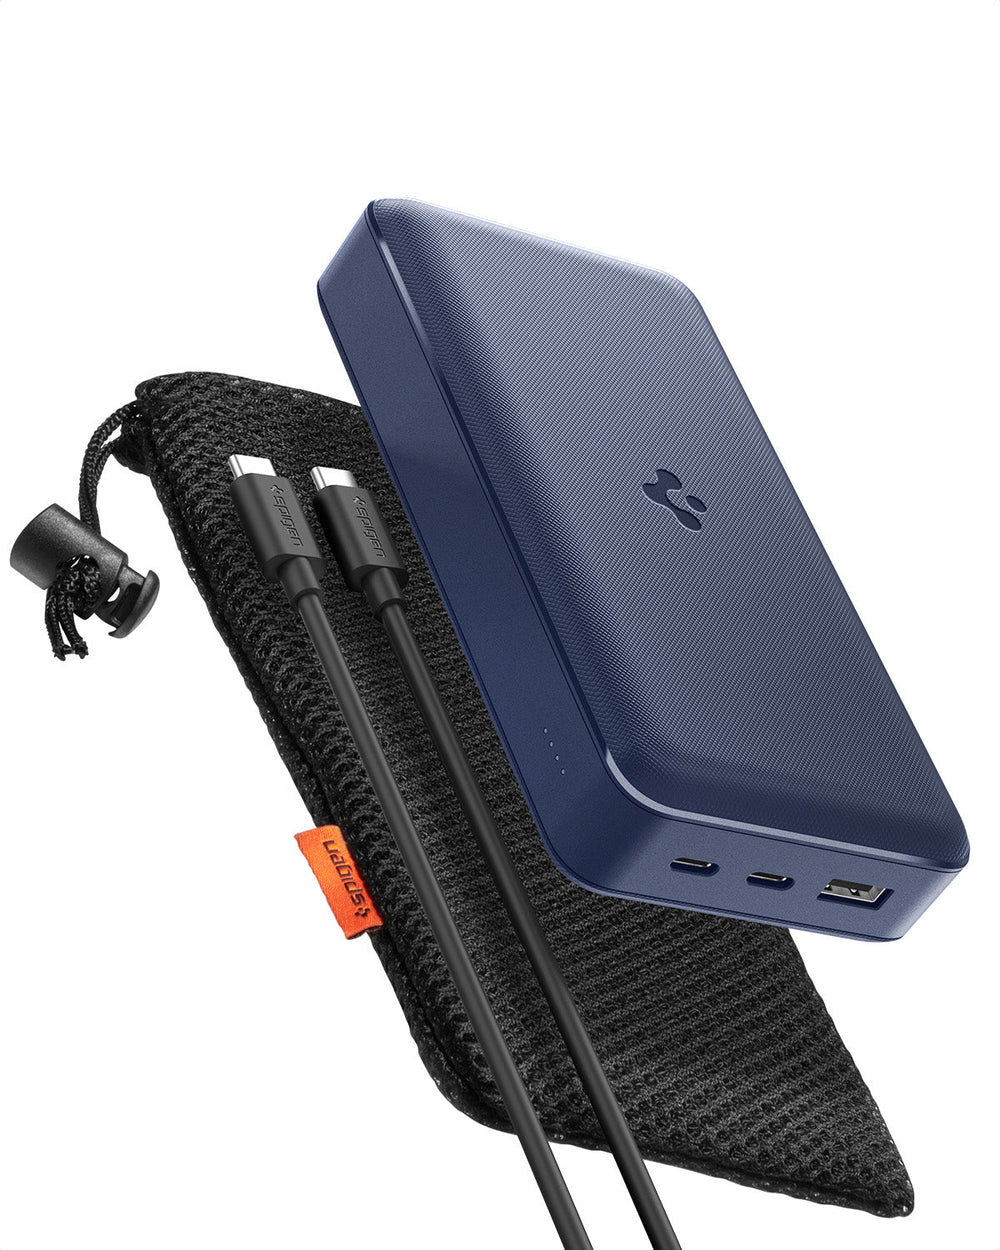 Iconic Power Bank (30,000mAh, 30W) with PD3.0, QC3.0